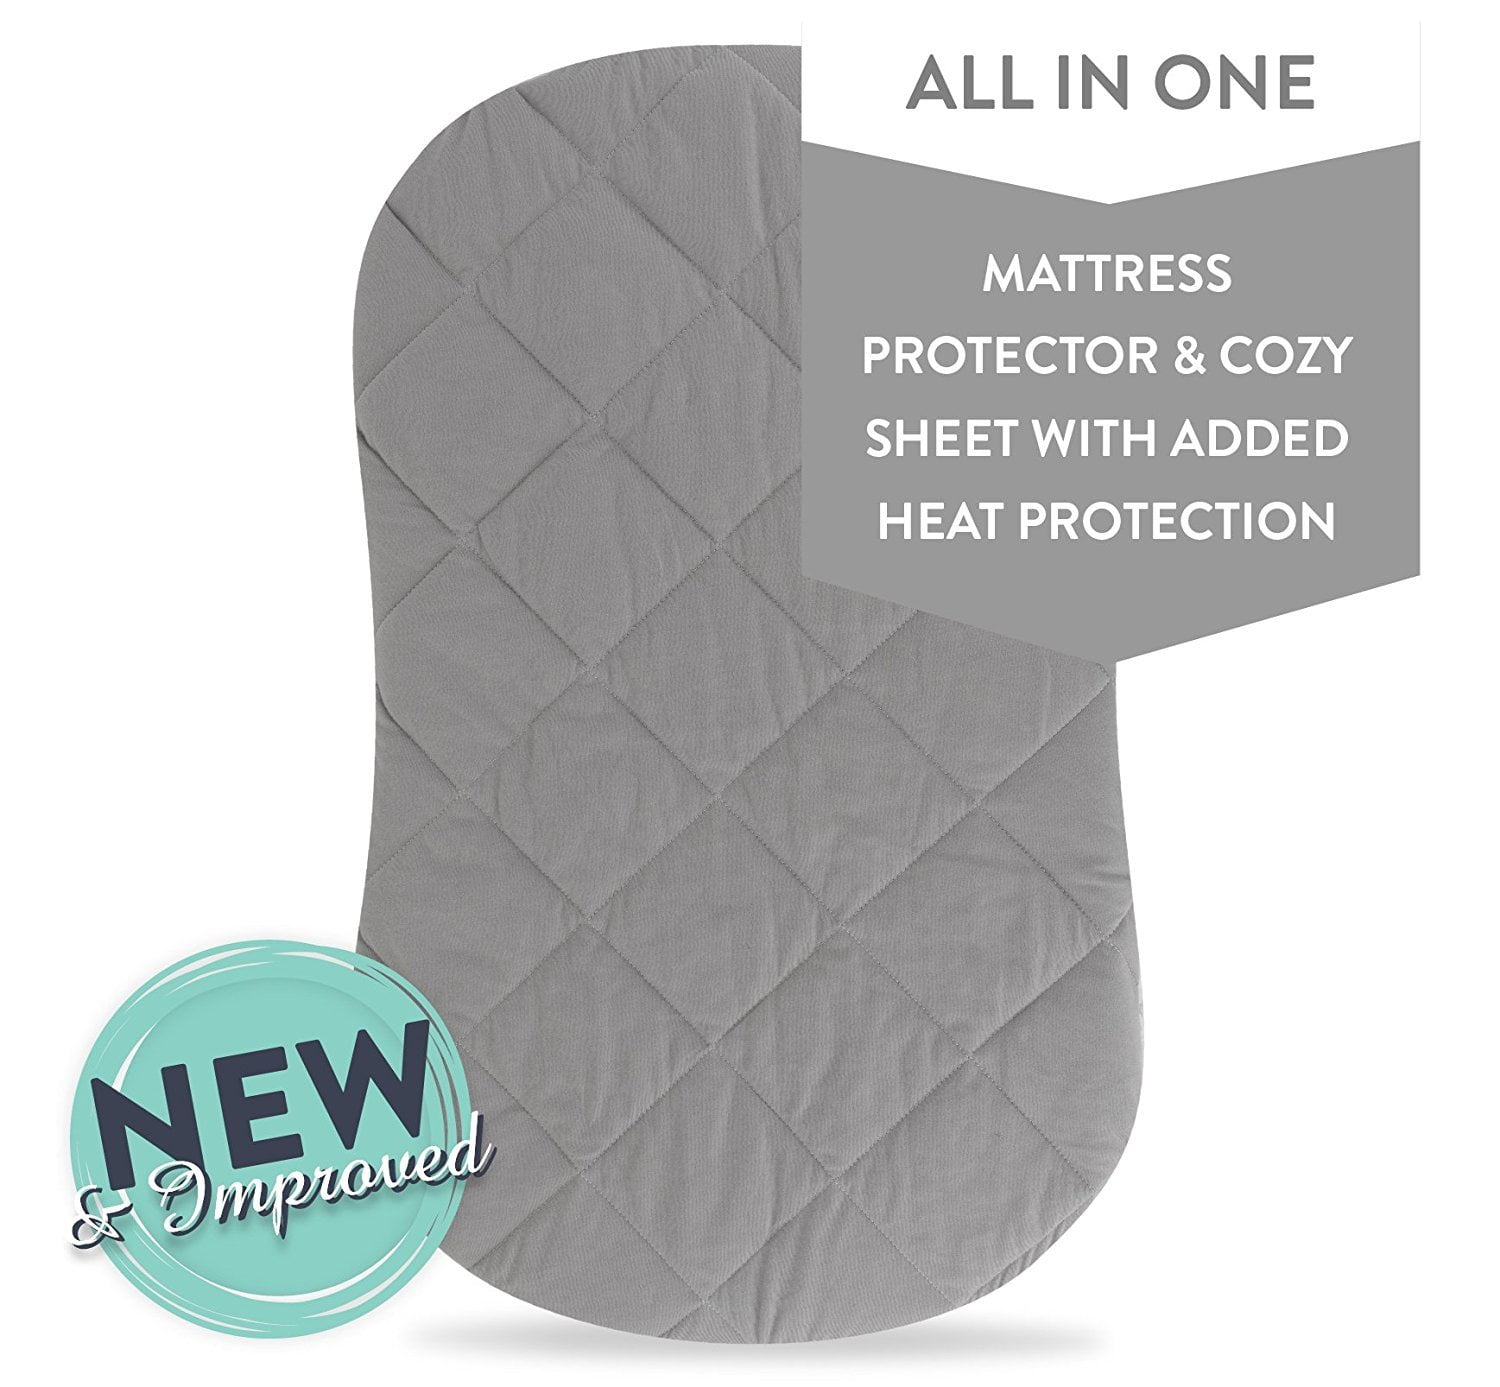 Ultra Soft Bamboo Fleece Surface Washer & Dryer Grey 2 Pack Waterproof No Loosen and Pre-Shrinked Fit for Hourglass/Oval Bassinet Mattress Bassinet Mattress Pad Cover